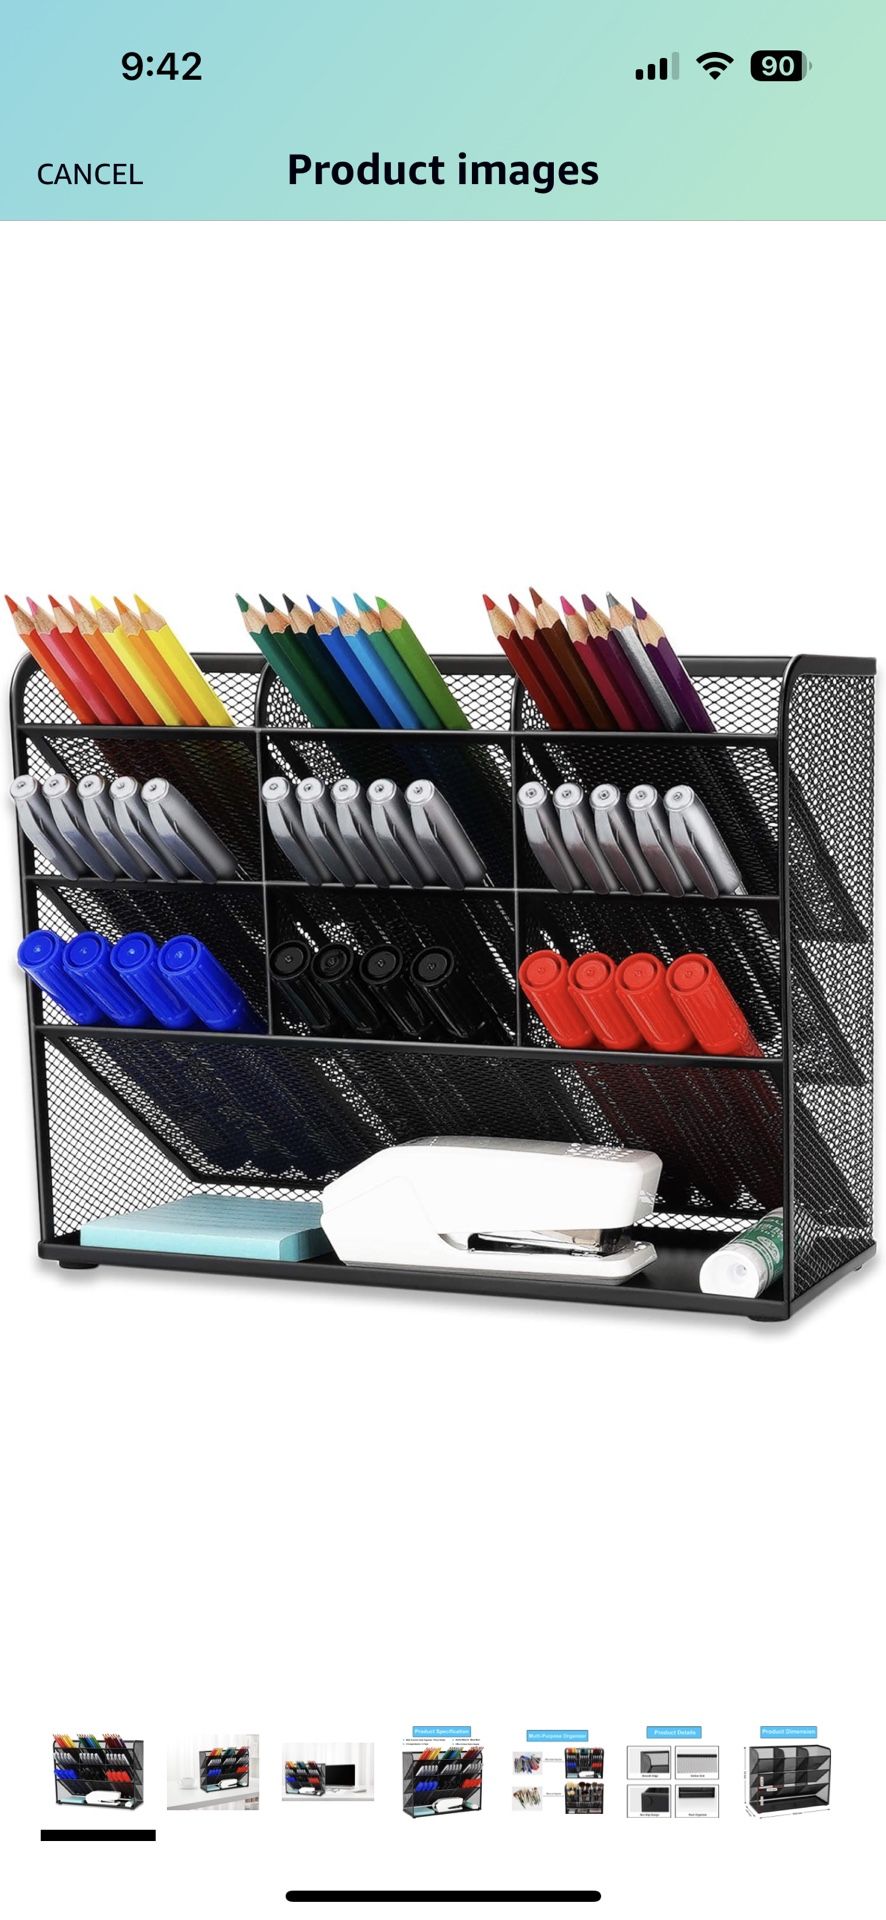 Mesh Desk Pencil Organizer, Pencil Holder, Office Desktop Organizer Collection - 9 Compartments with A Storage Rack - Markers Pen Holder for Office Sc